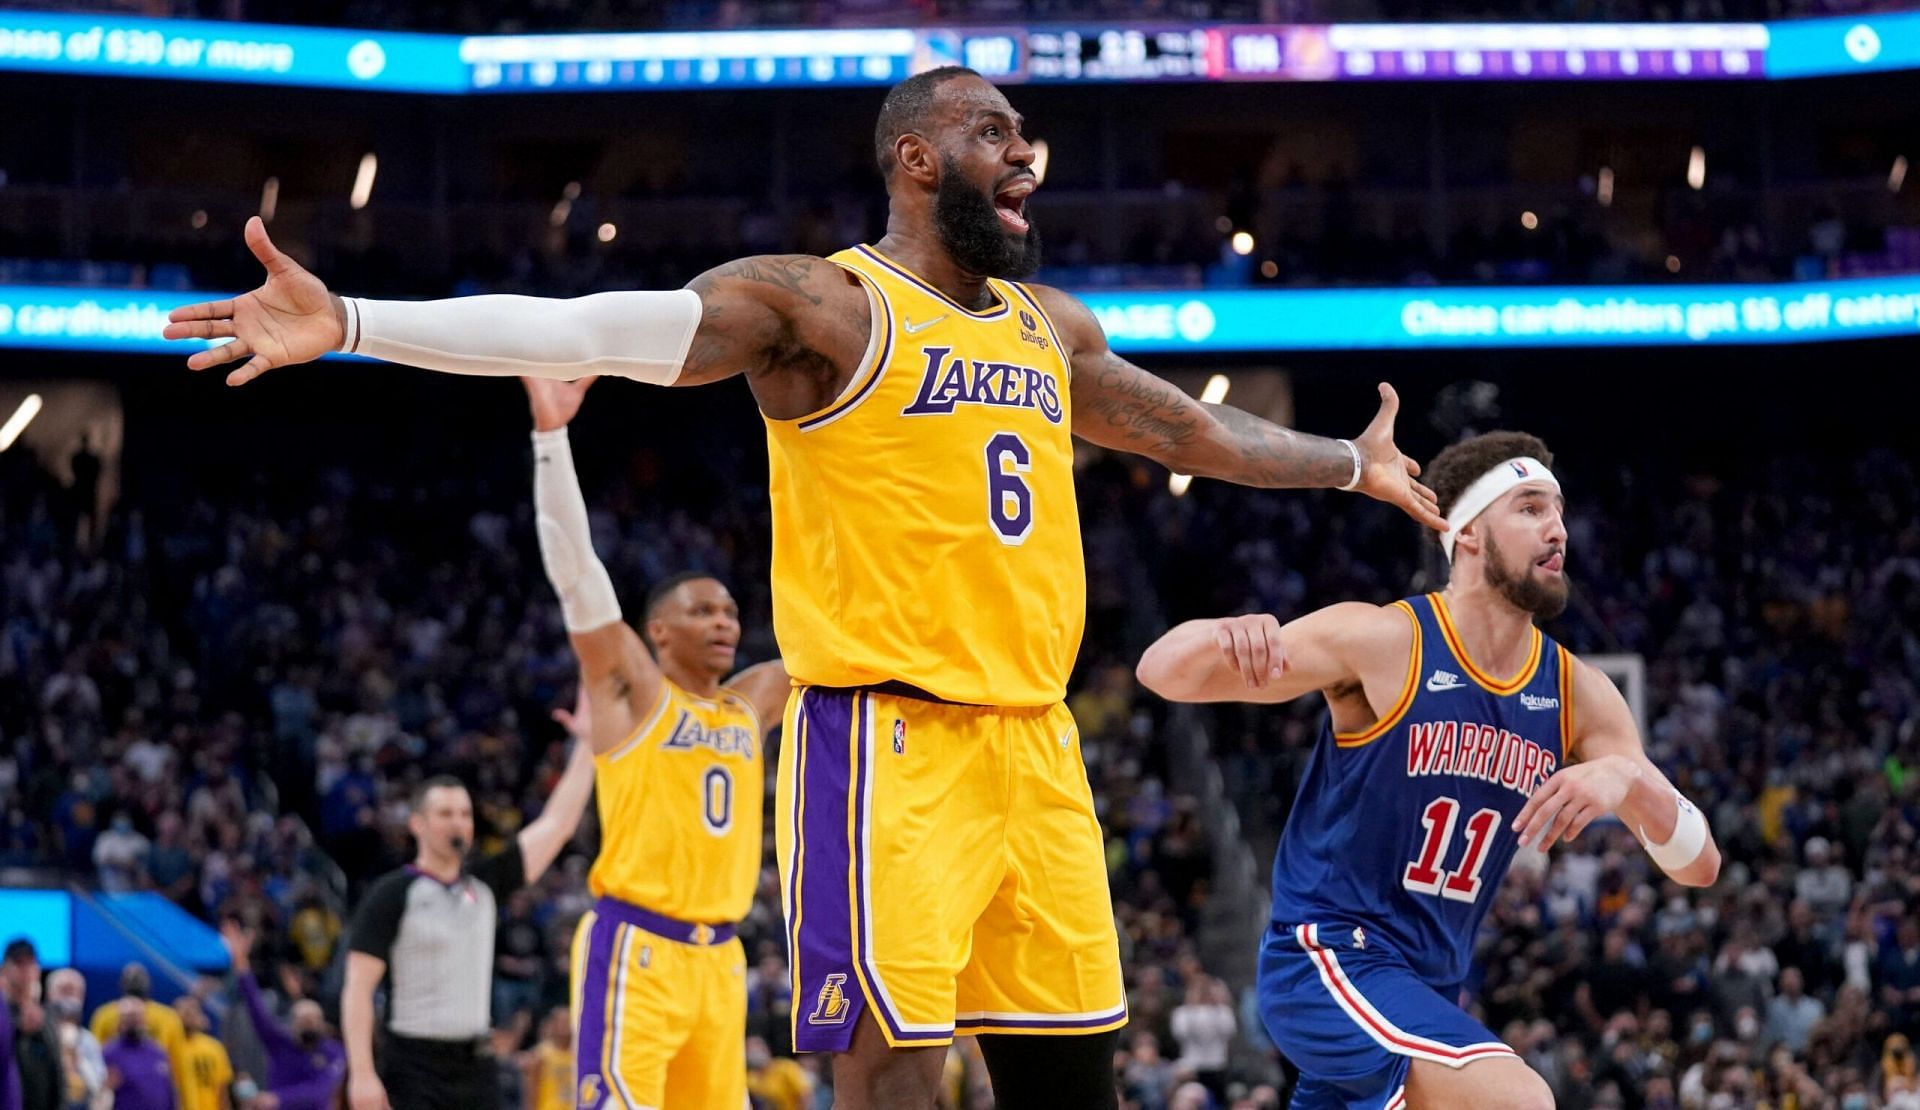 The LA Lakers played well but could not get over the hump against the Golden State Warriors. [Photo: Rappler]